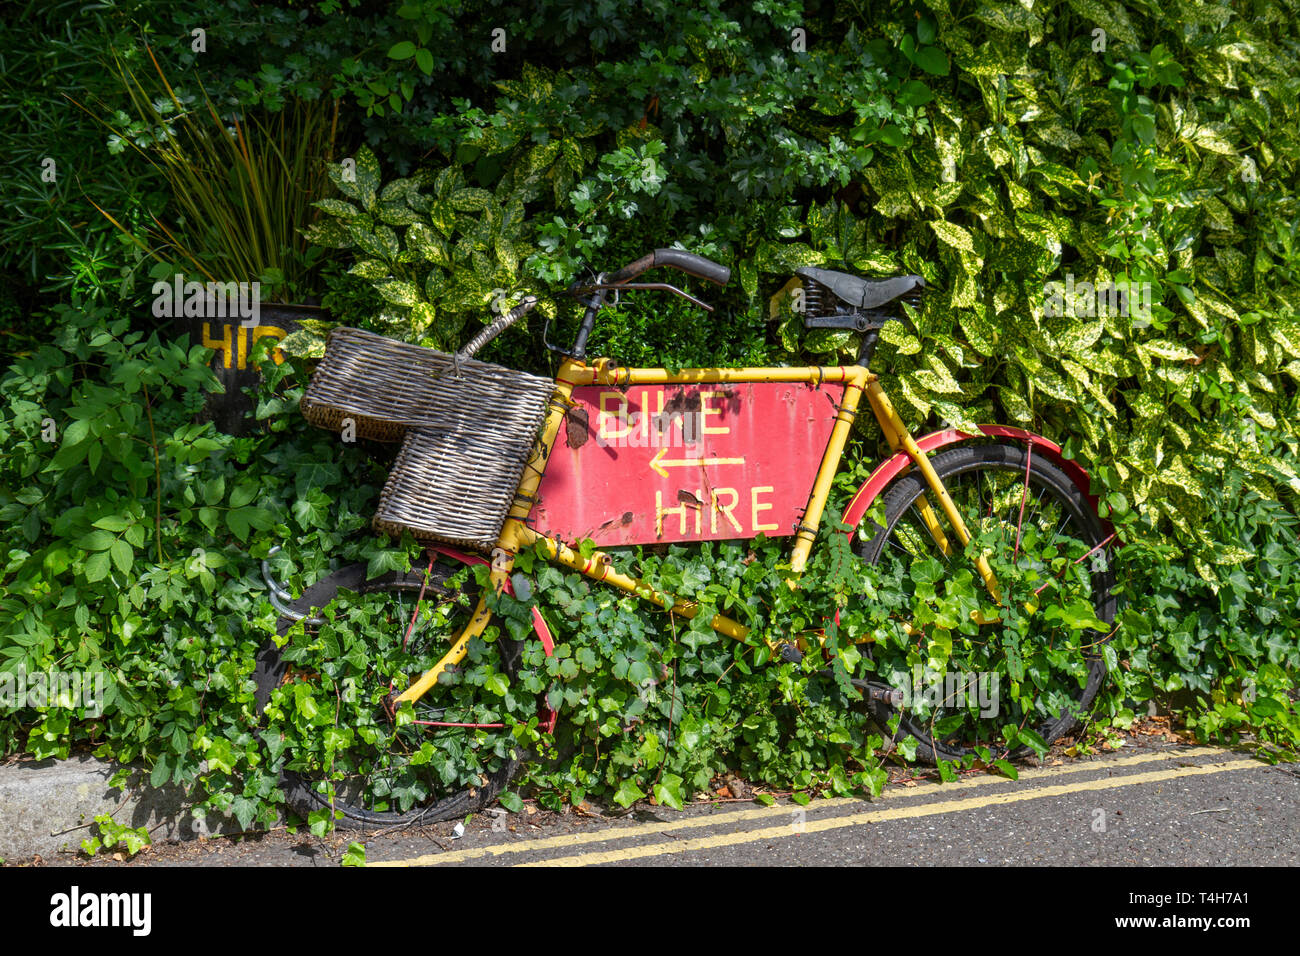 Bike hire shops bike frame advert being overgrown by a bush in Lyndhurst, New Forest, Hampshire, UK. Stock Photo